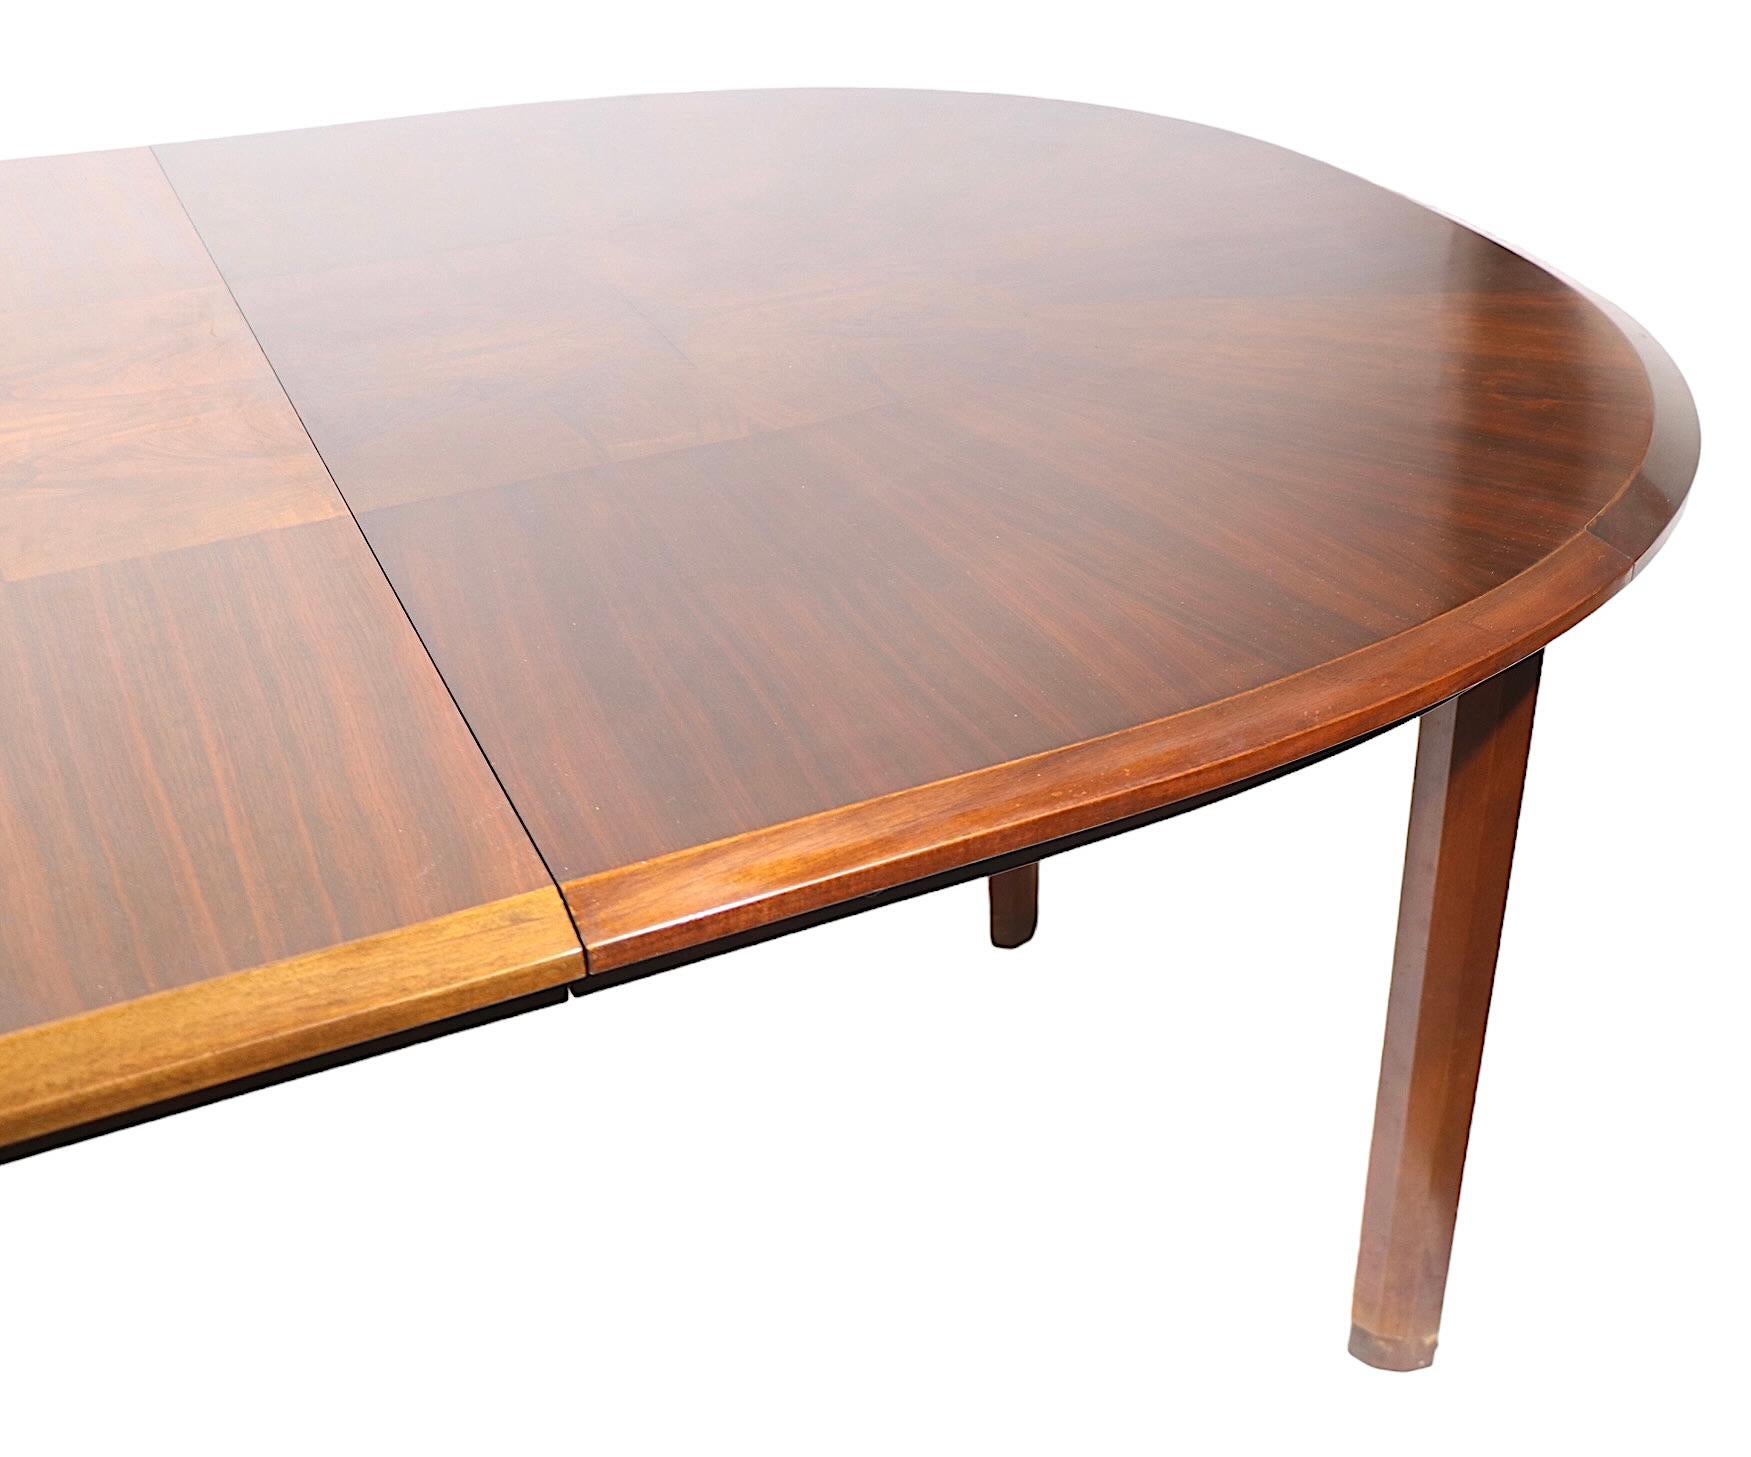 Walnut Mid Century Swedish Extendable Oval Dining Table by Edmund Spence c 1950's For Sale